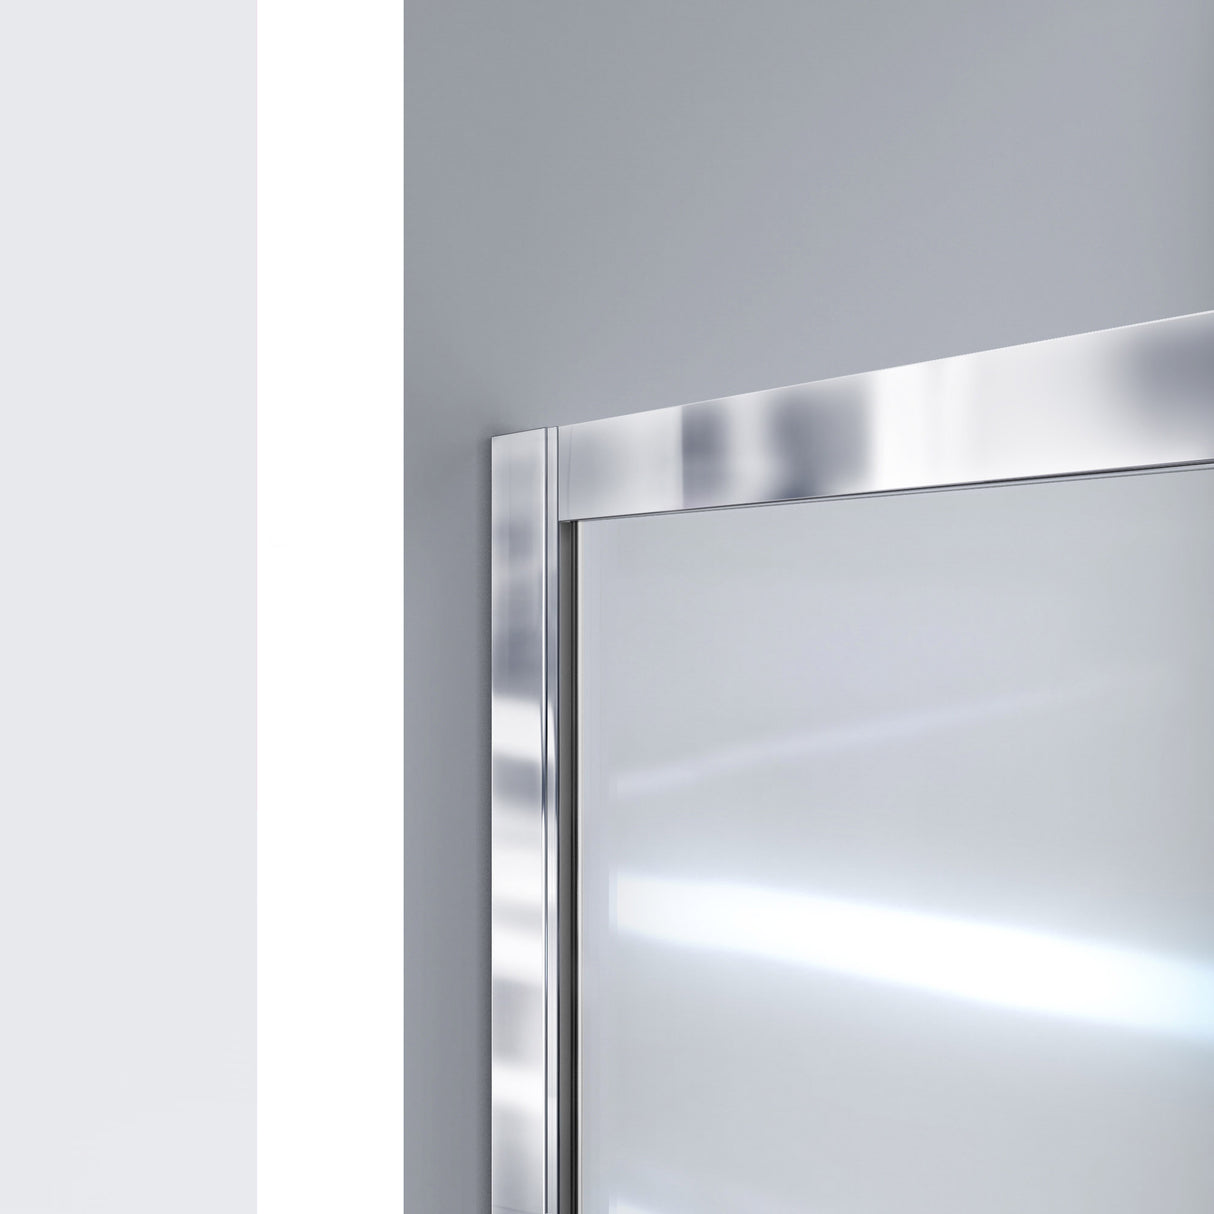 DreamLine Infinity-Z 30 in. D x 60 in. W x 74 3/4 in. H Clear Sliding Shower Door in Chrome and Left Drain Biscuit Base